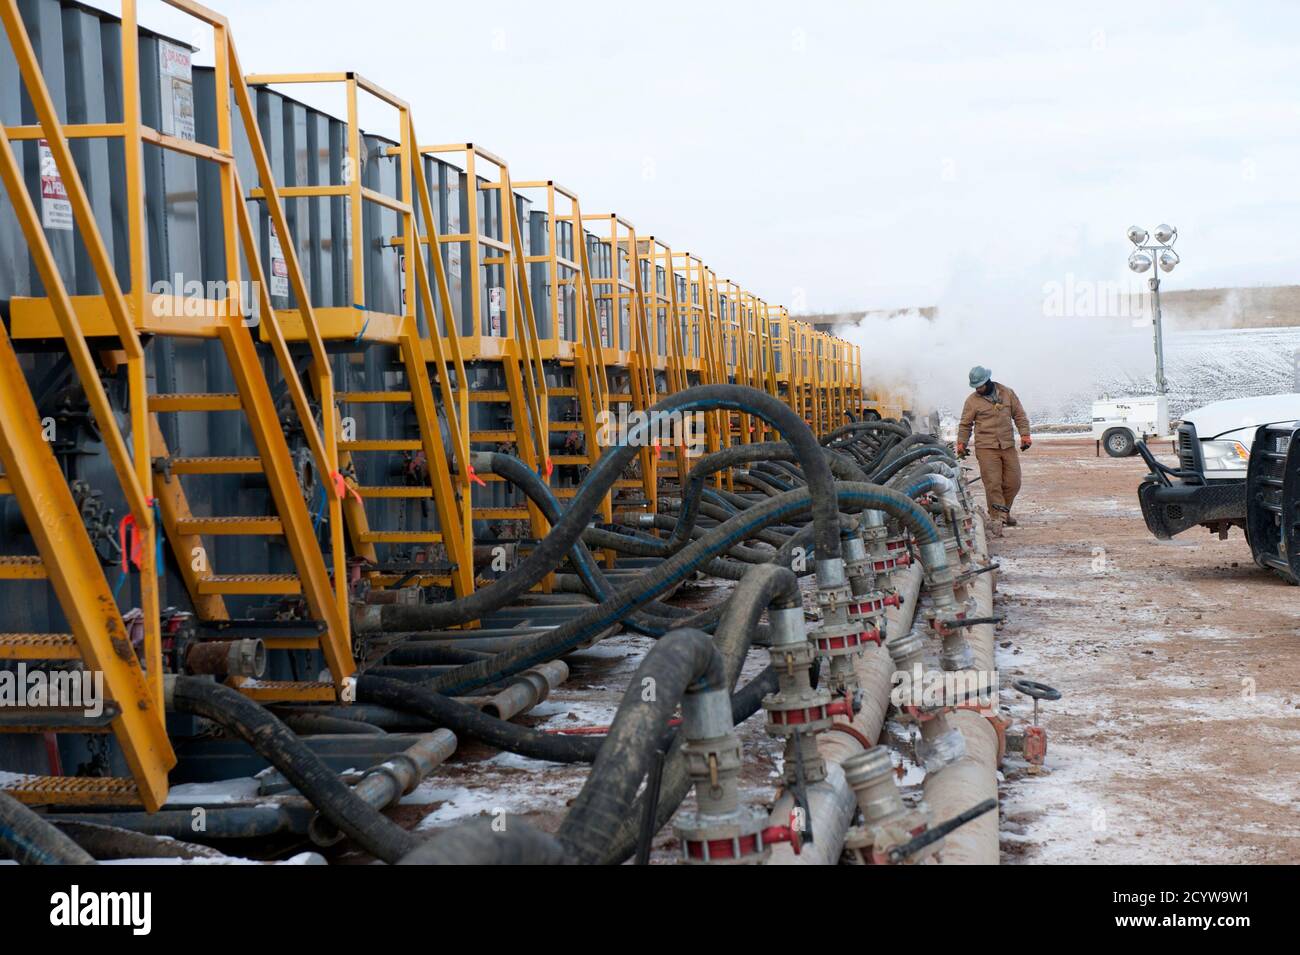 A worker monitors water tanks at a Hess fracking site near Williston, North Dakota November 12, 2014.  Falling oil prices have yet to spoil North Dakota's party, with billions of investment dollars still flowing for new wells and pipelines, apartments and shopping centers, a tacit bet the third energy boom in the state's history is just getting started.   REUTERS/Andrew Cullen (UNITED STATES  - Tags: BUSINESS COMMODITIES ENERGY) Stock Photo